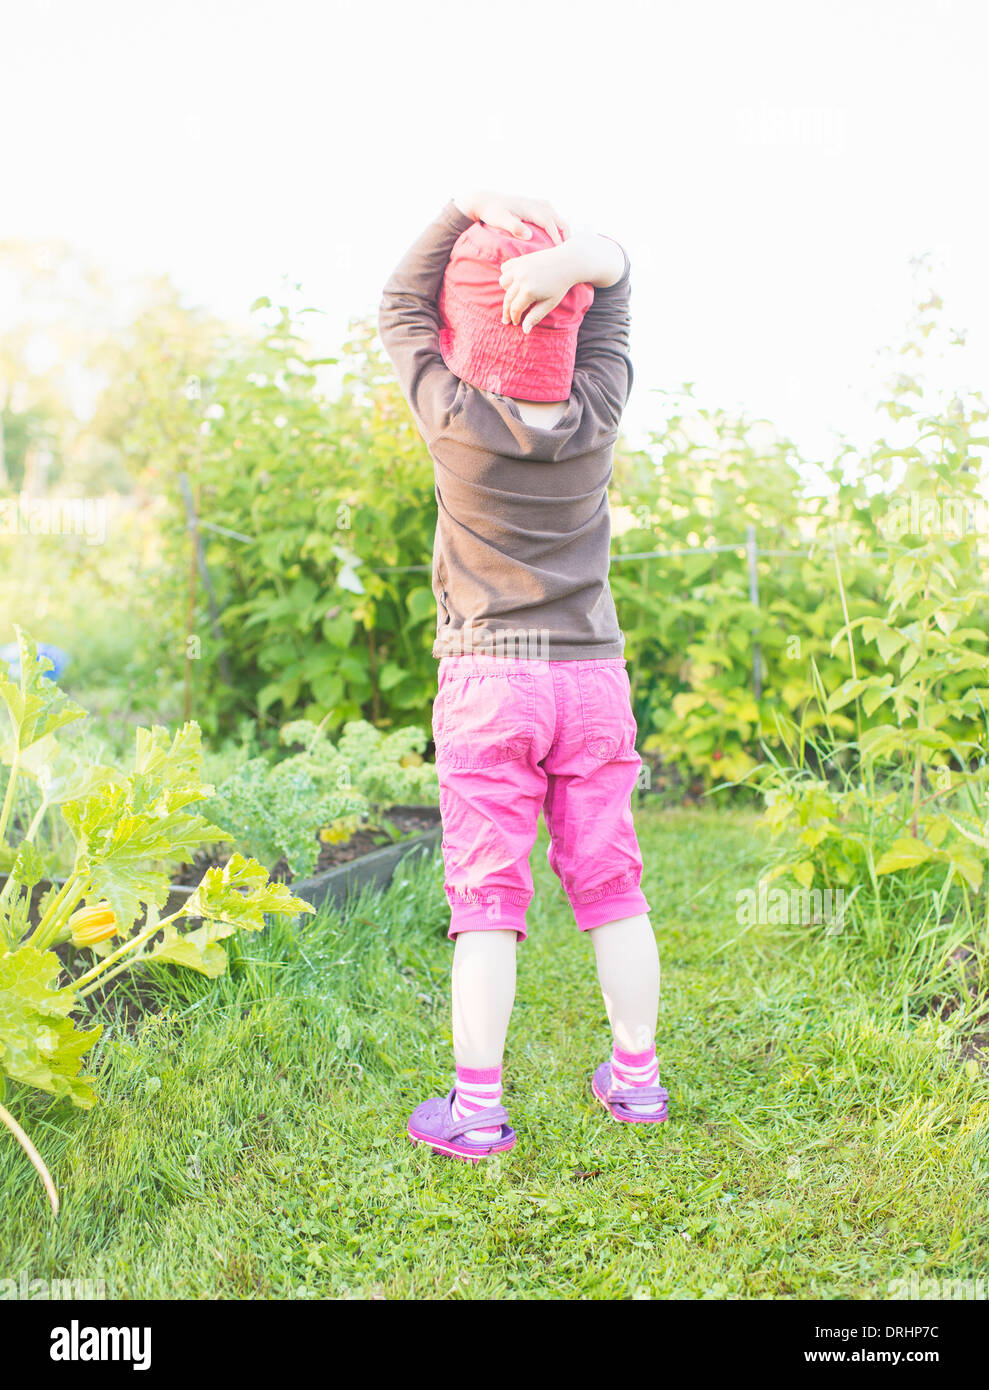 Tranquil summer scene. Young girl standing in garden, watching plants and flowers. Stock Photo